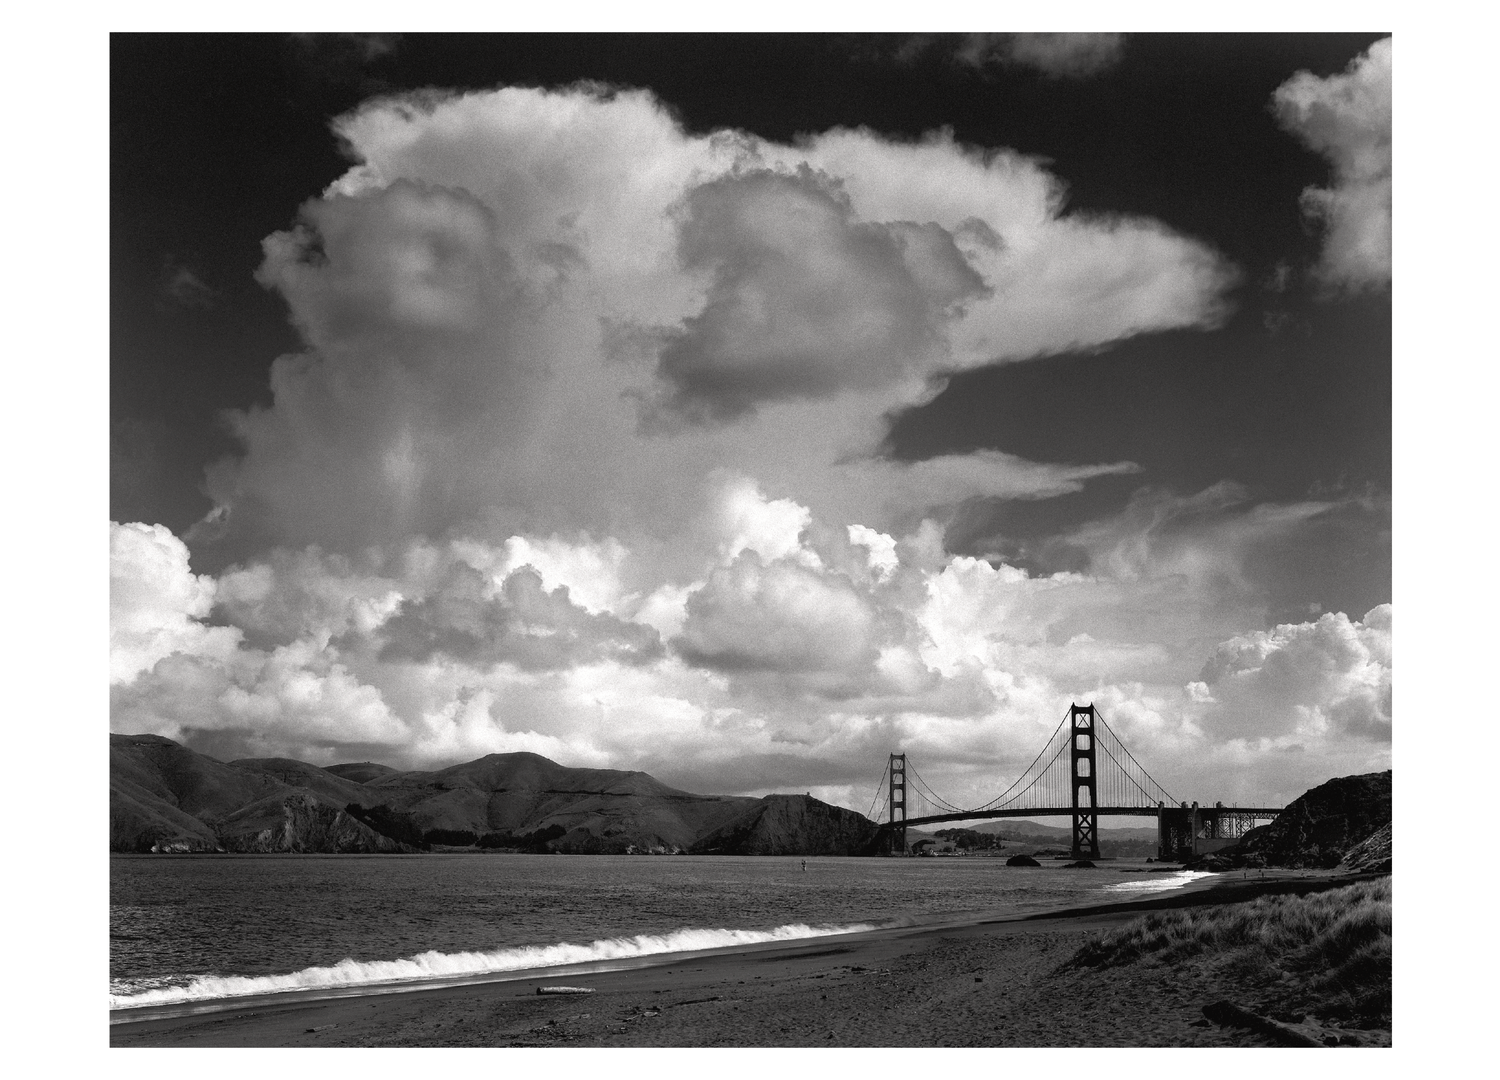 GOLDEN GATE BRIDGE FROM BAKER BEACH - LARGE MATTED REPRODUCTION